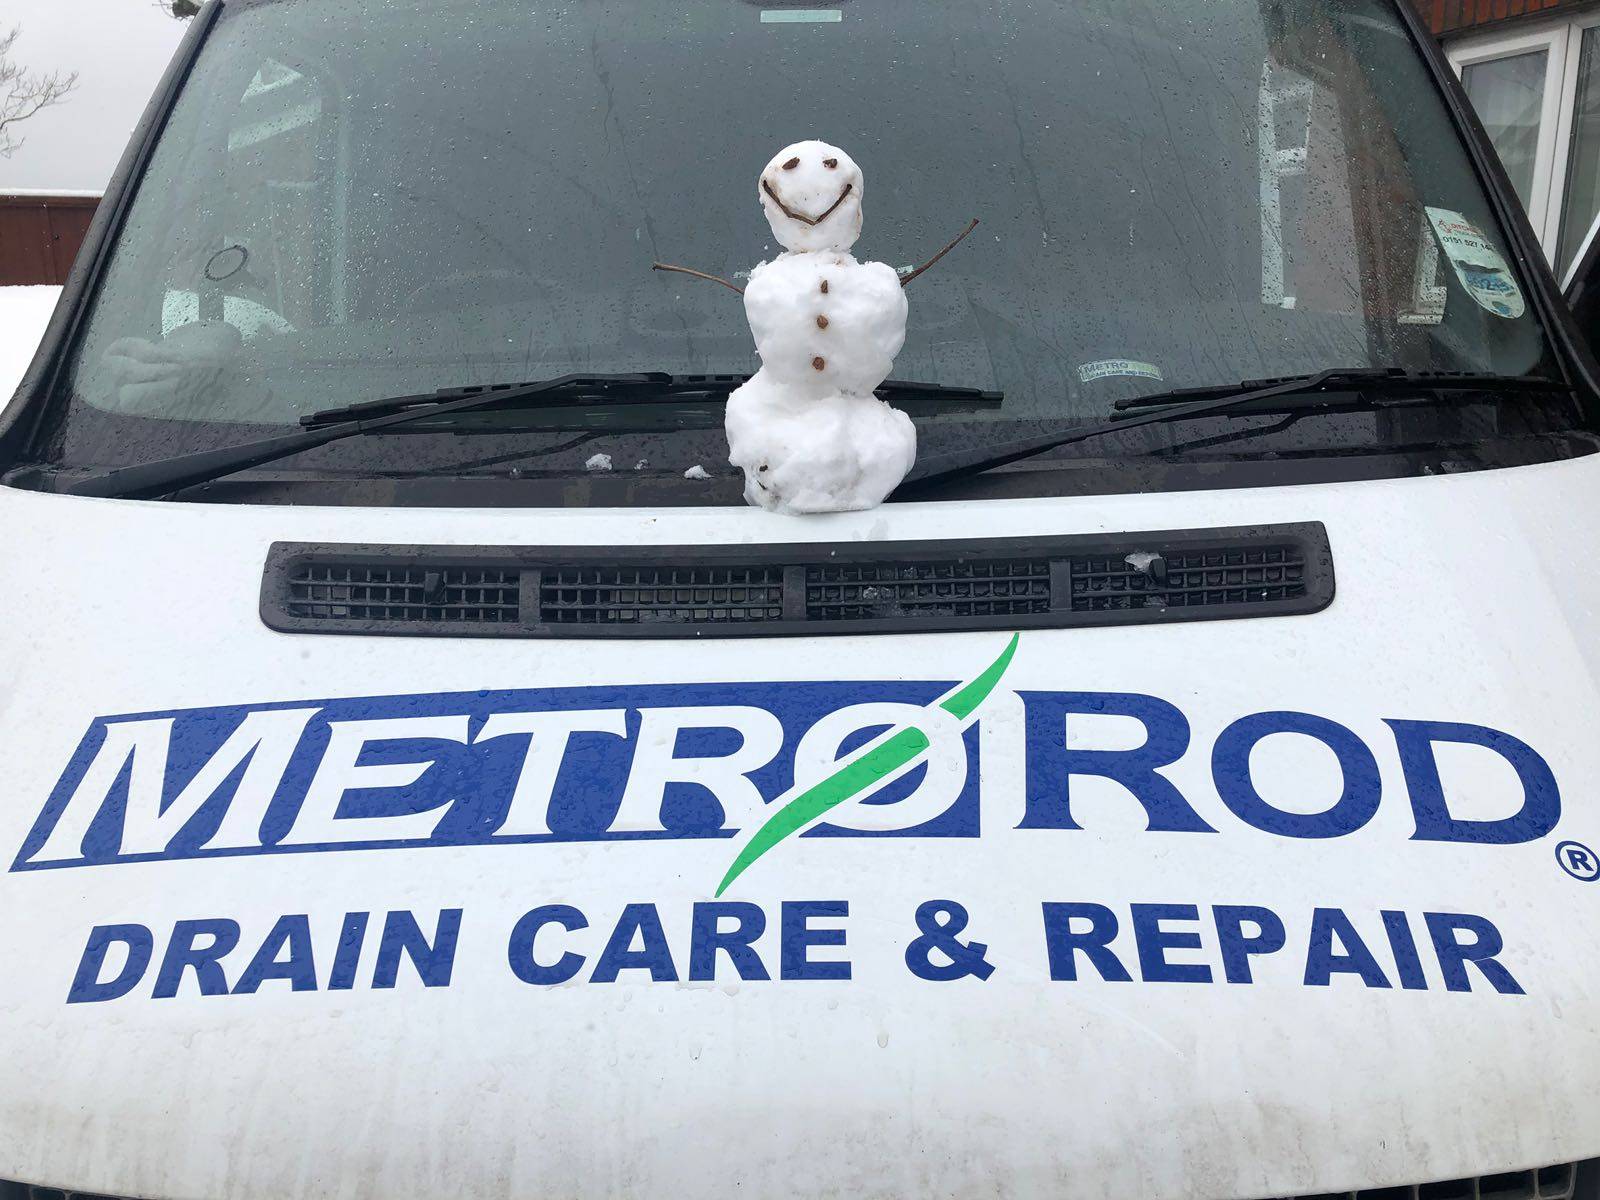 Tips For Drains In Cold Weather – Metro Rod Manchester